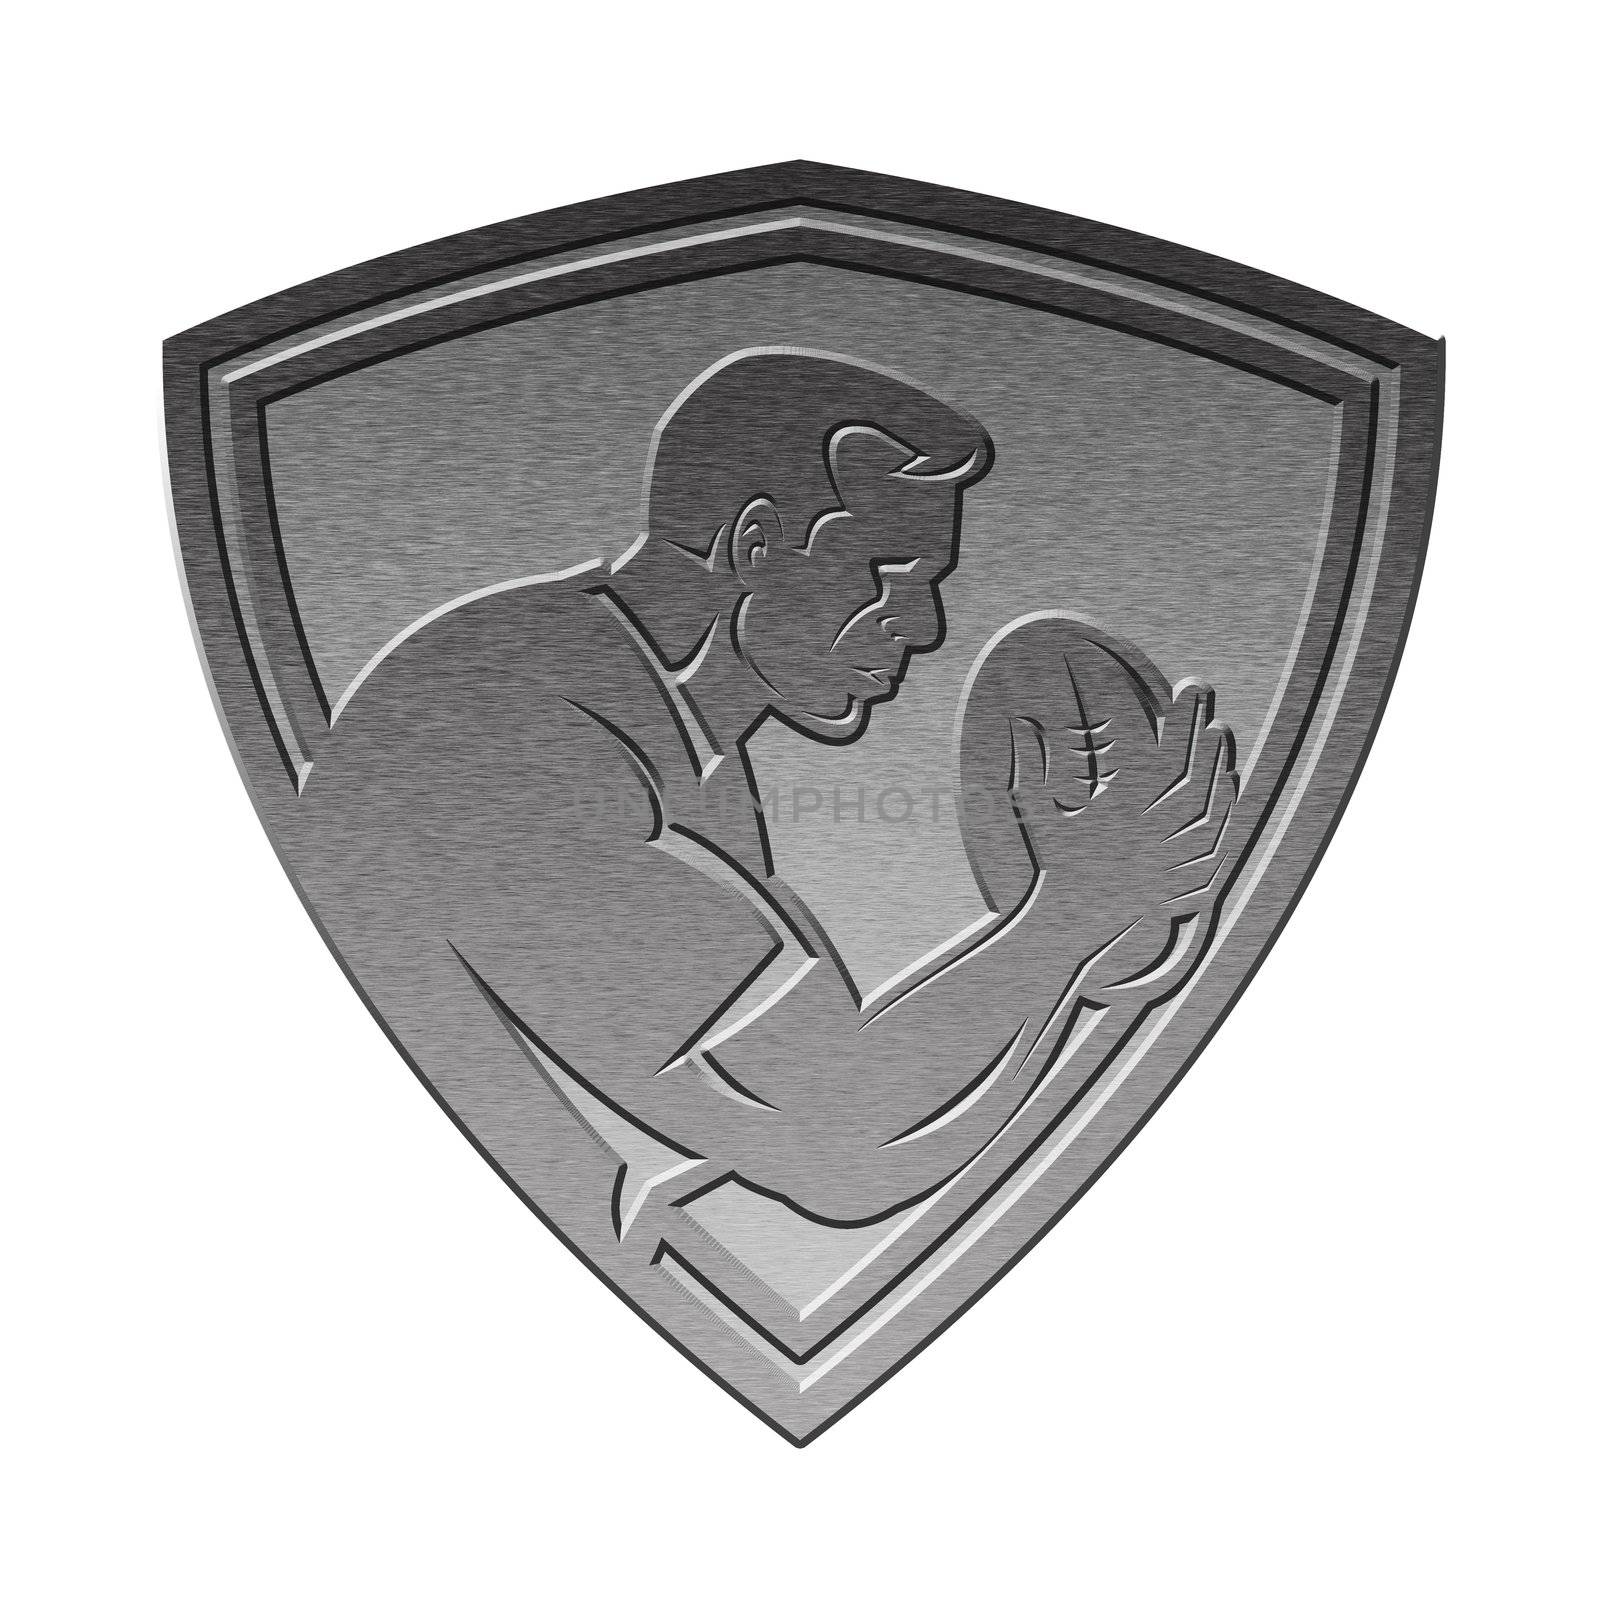 rugby player shield metallic silver by patrimonio